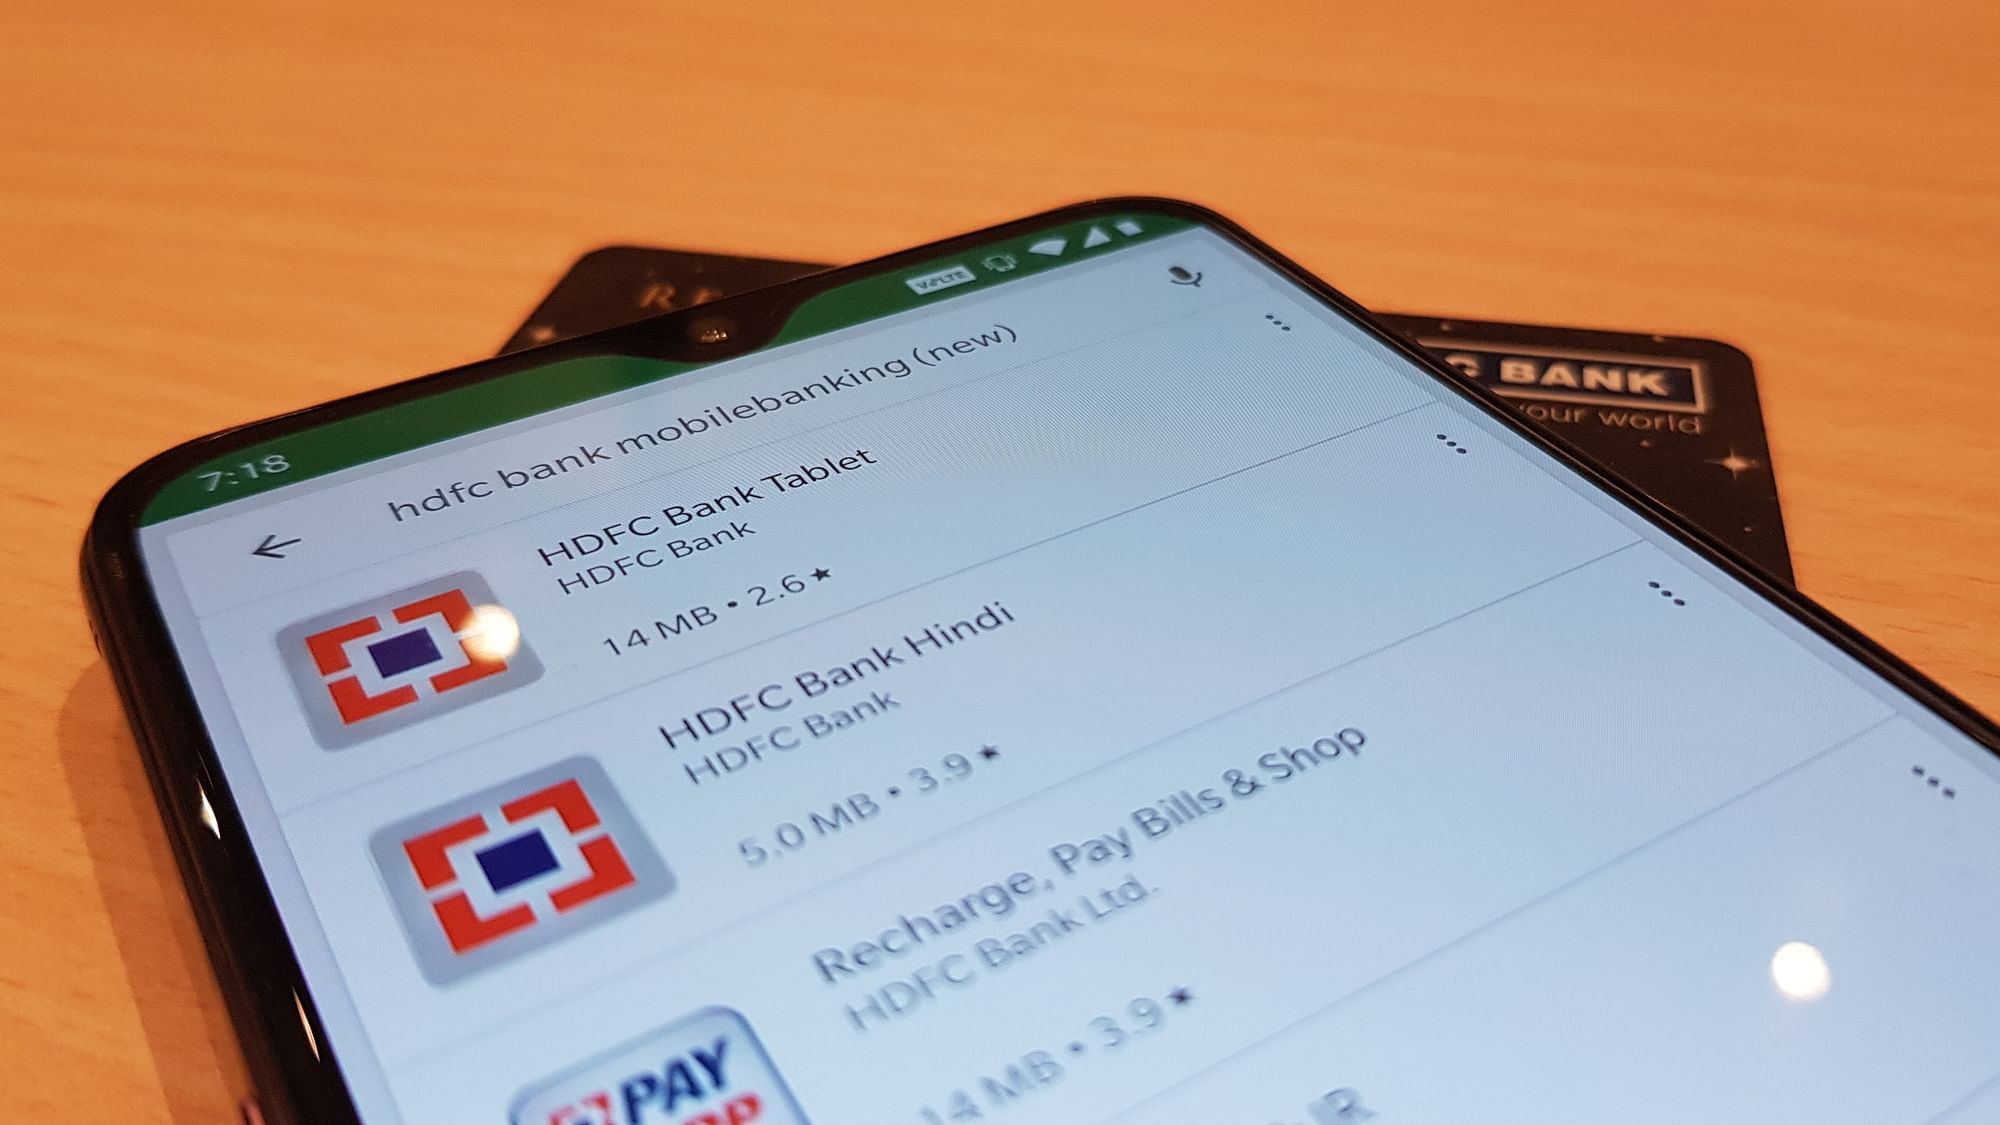 HDFC has pulled its mobile banking app off the Android Play Store.&nbsp;